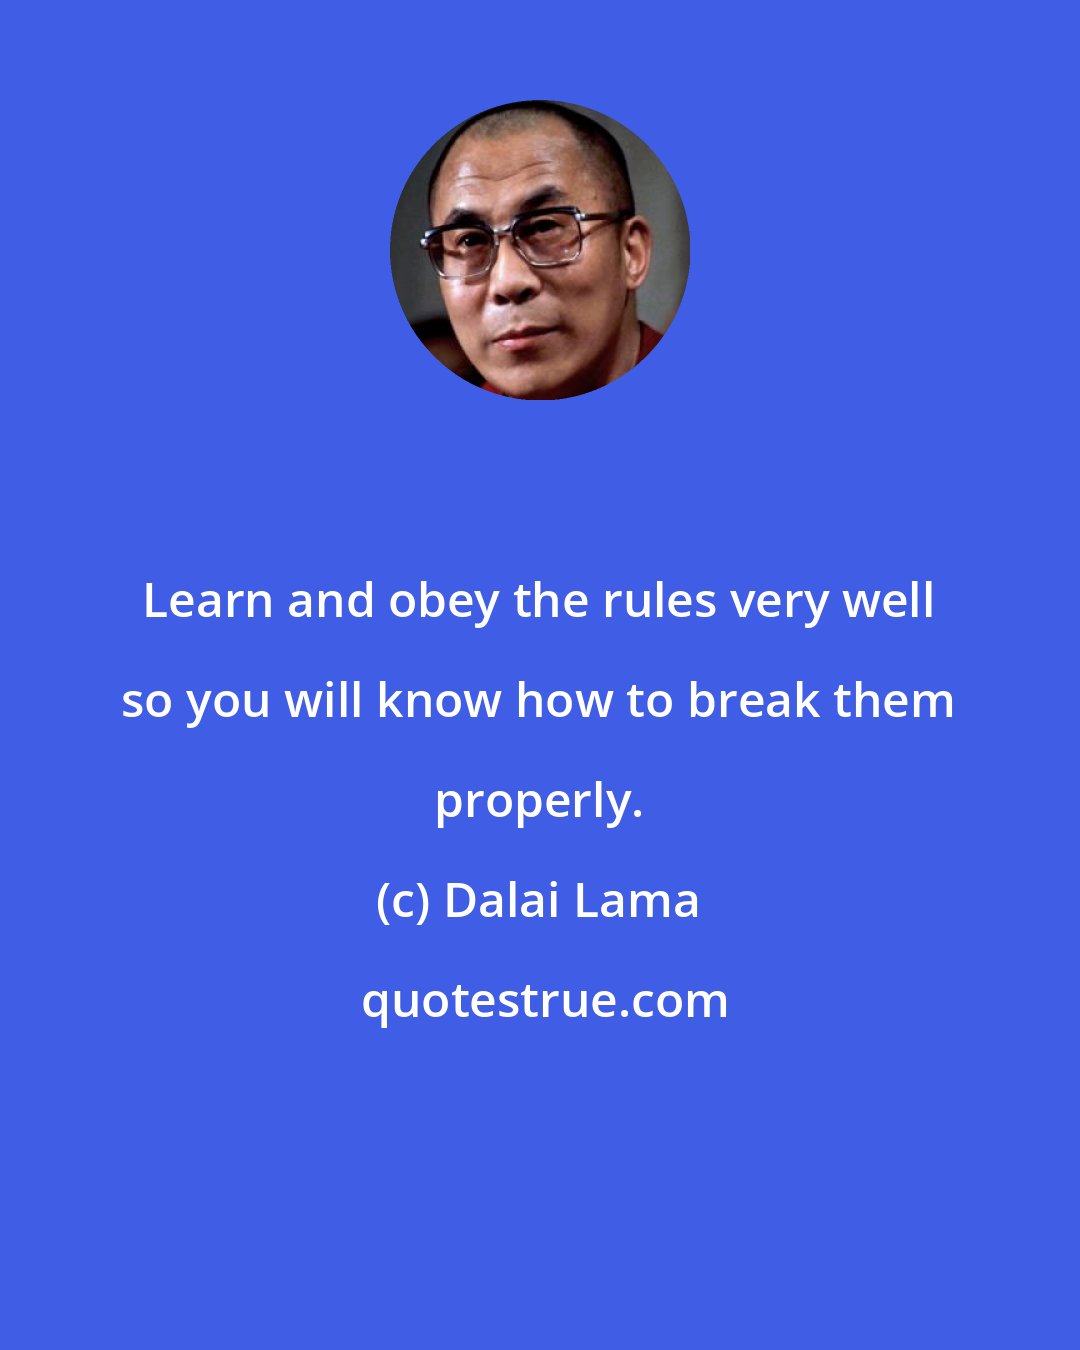 Dalai Lama: Learn and obey the rules very well so you will know how to break them properly.